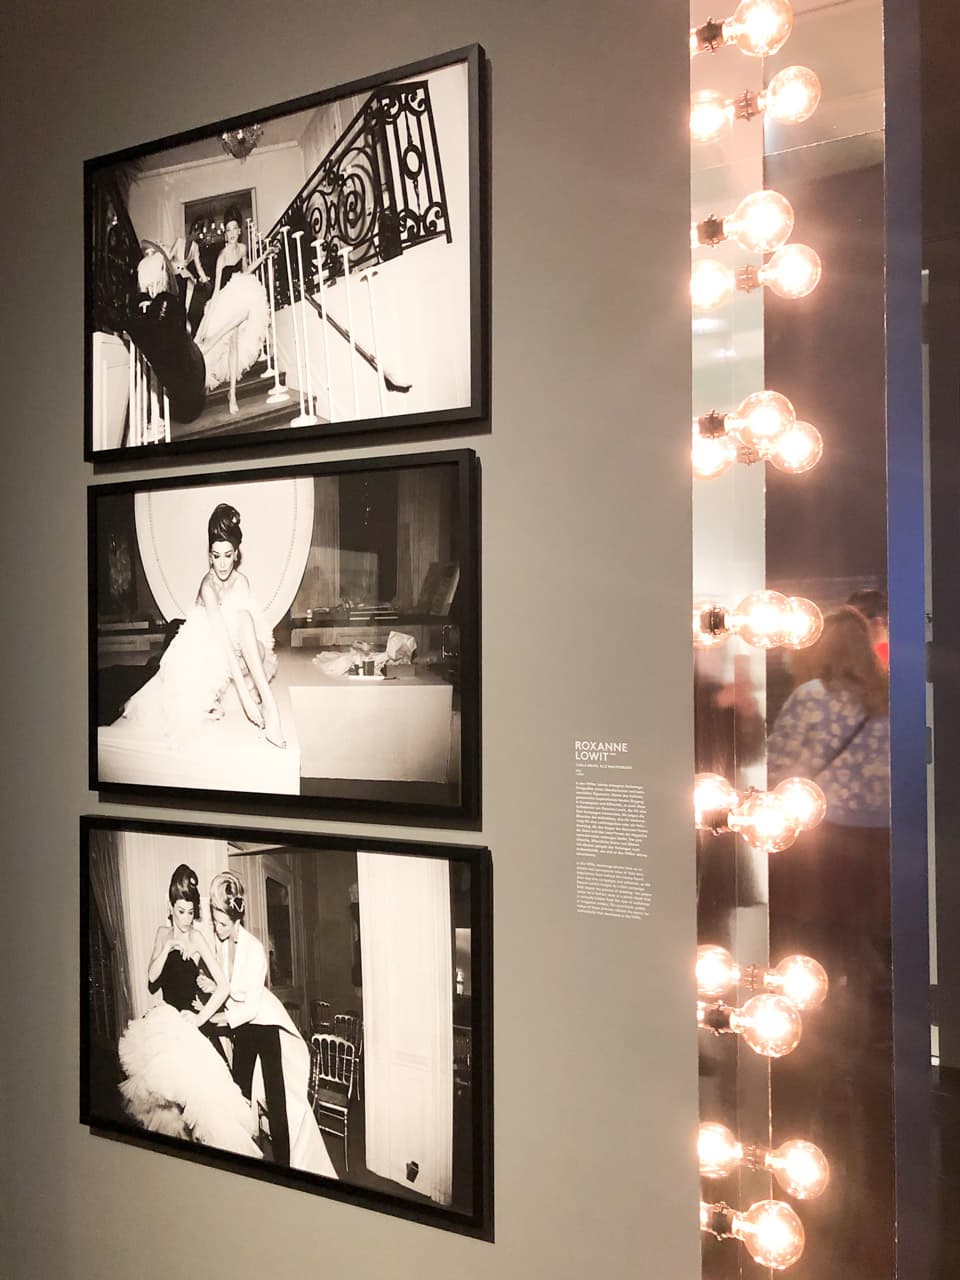 Three framed black and white photos of supermodels taken backstage of a fashion show by Roxanne Lowit